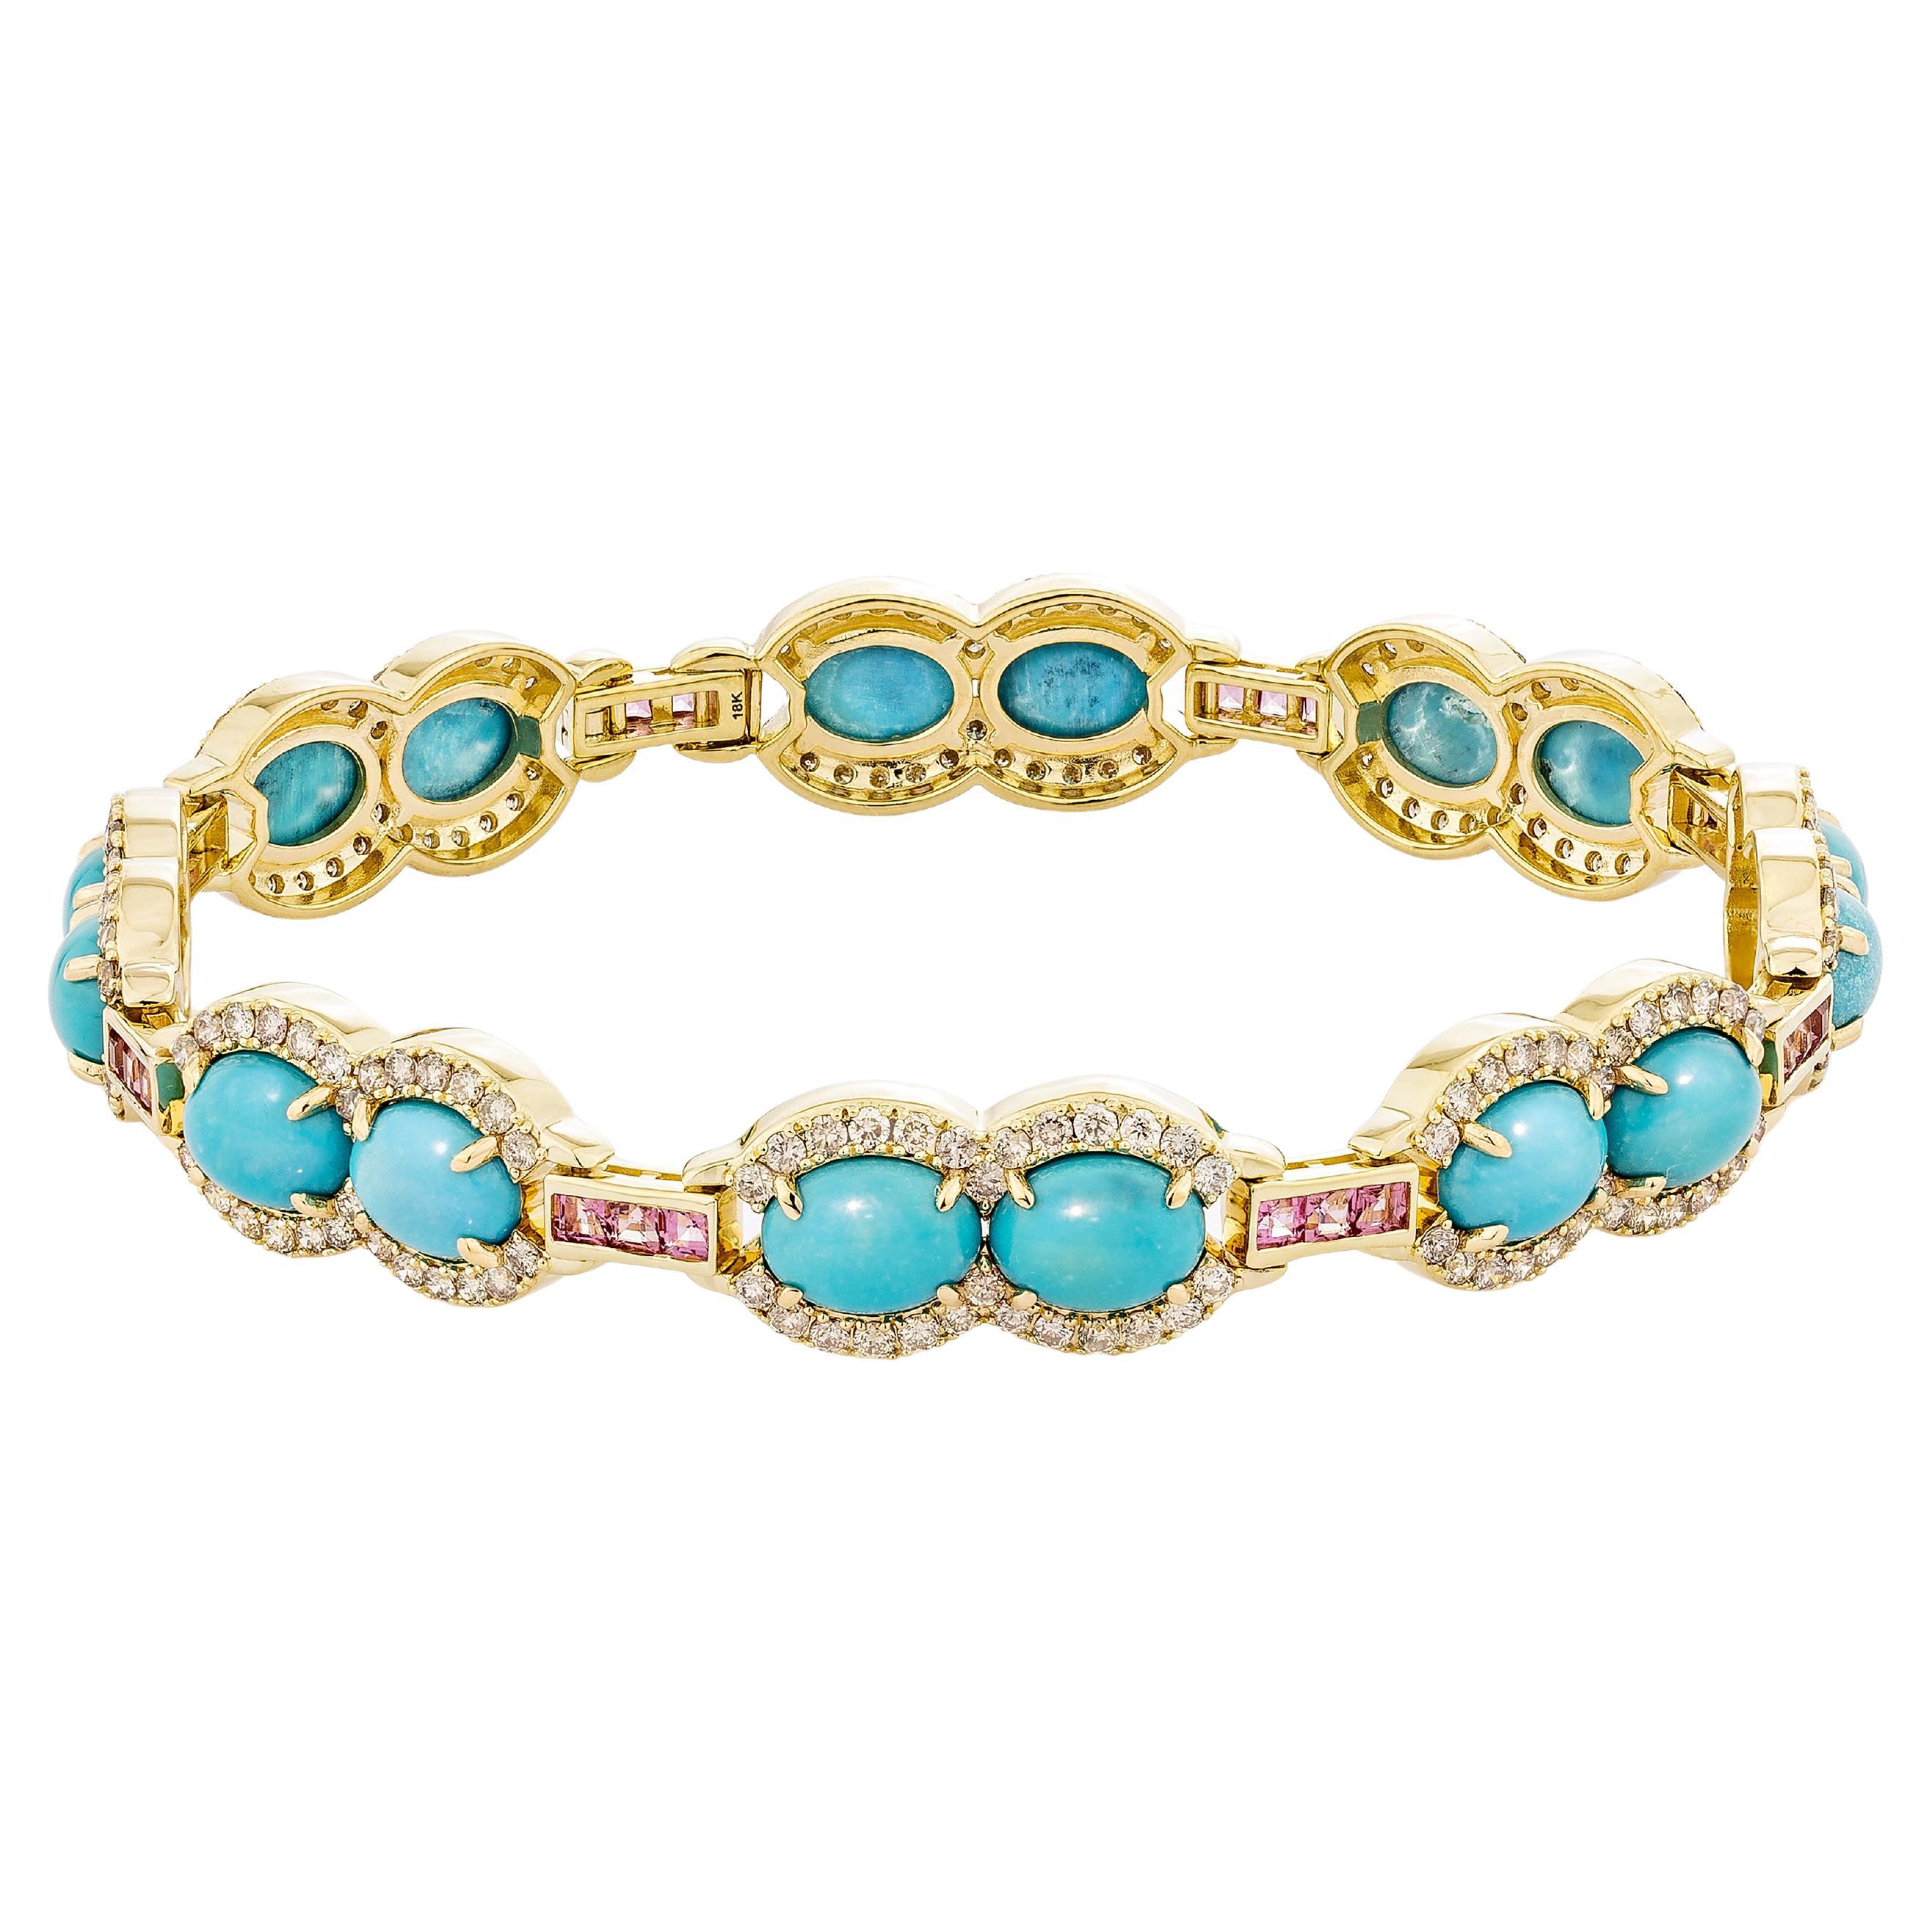 16.55 Carat Turquoise Bracelet in 14KYG with Pink Tourmaline and White Diamond. For Sale